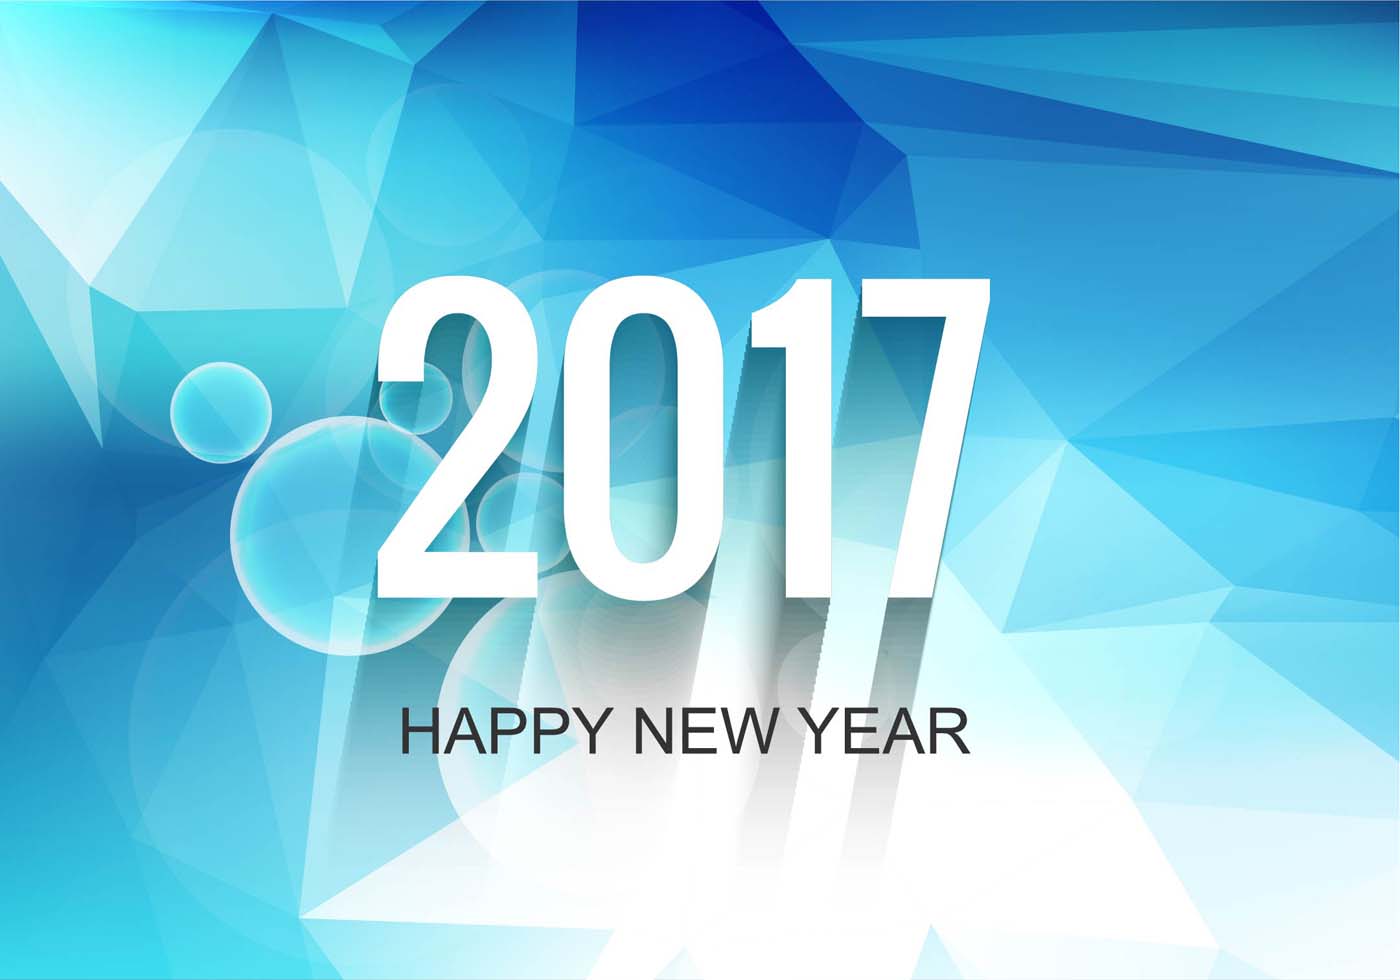 Free Vector New Year 2017 Modern Background - Download ...